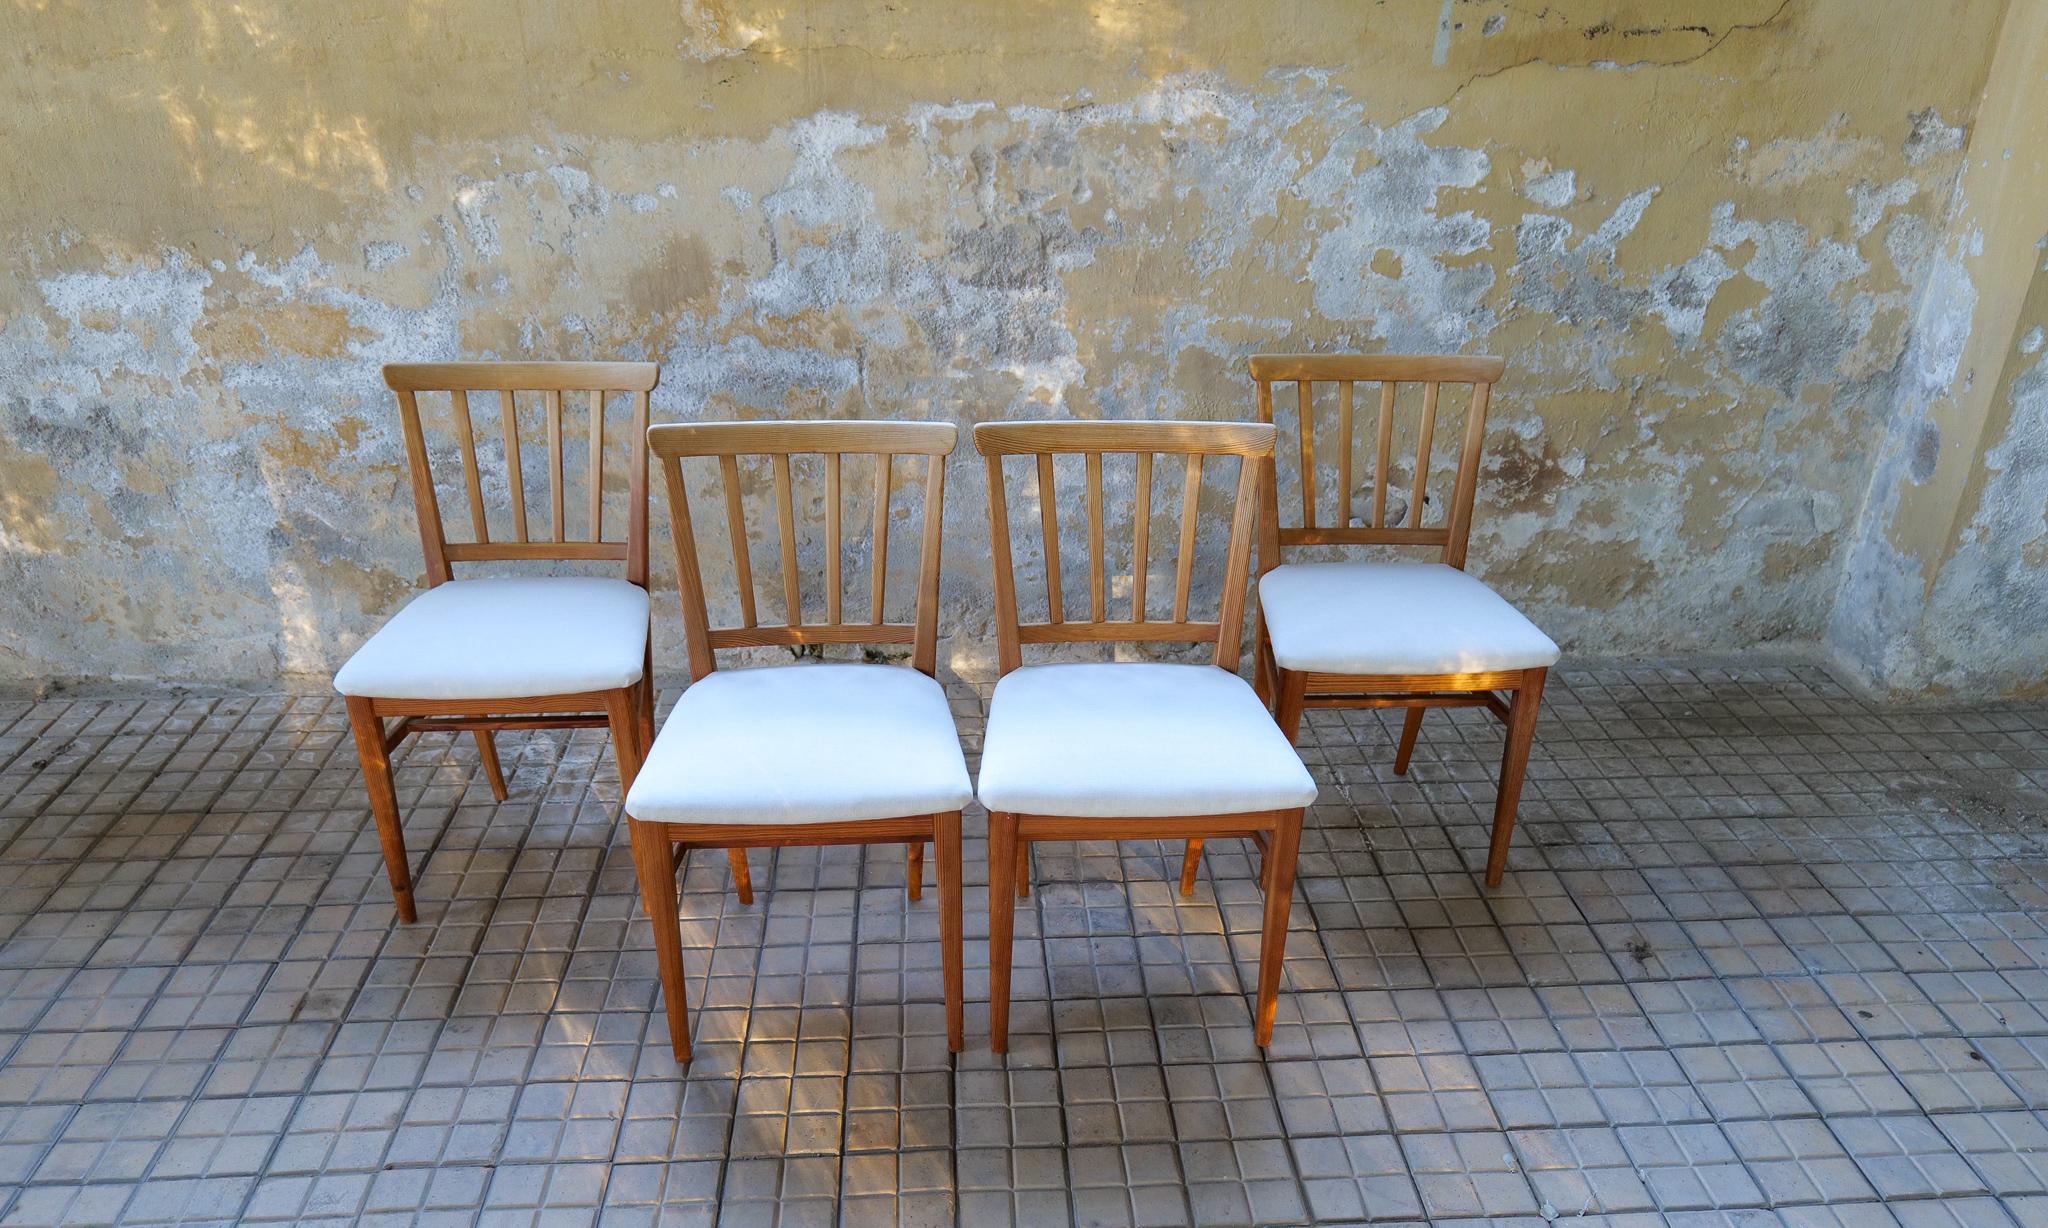 Midcentury Set of 4 Carl Malmsten Chairs Dining in Pine, Sweden, 1940s In Good Condition For Sale In Hillringsberg, SE